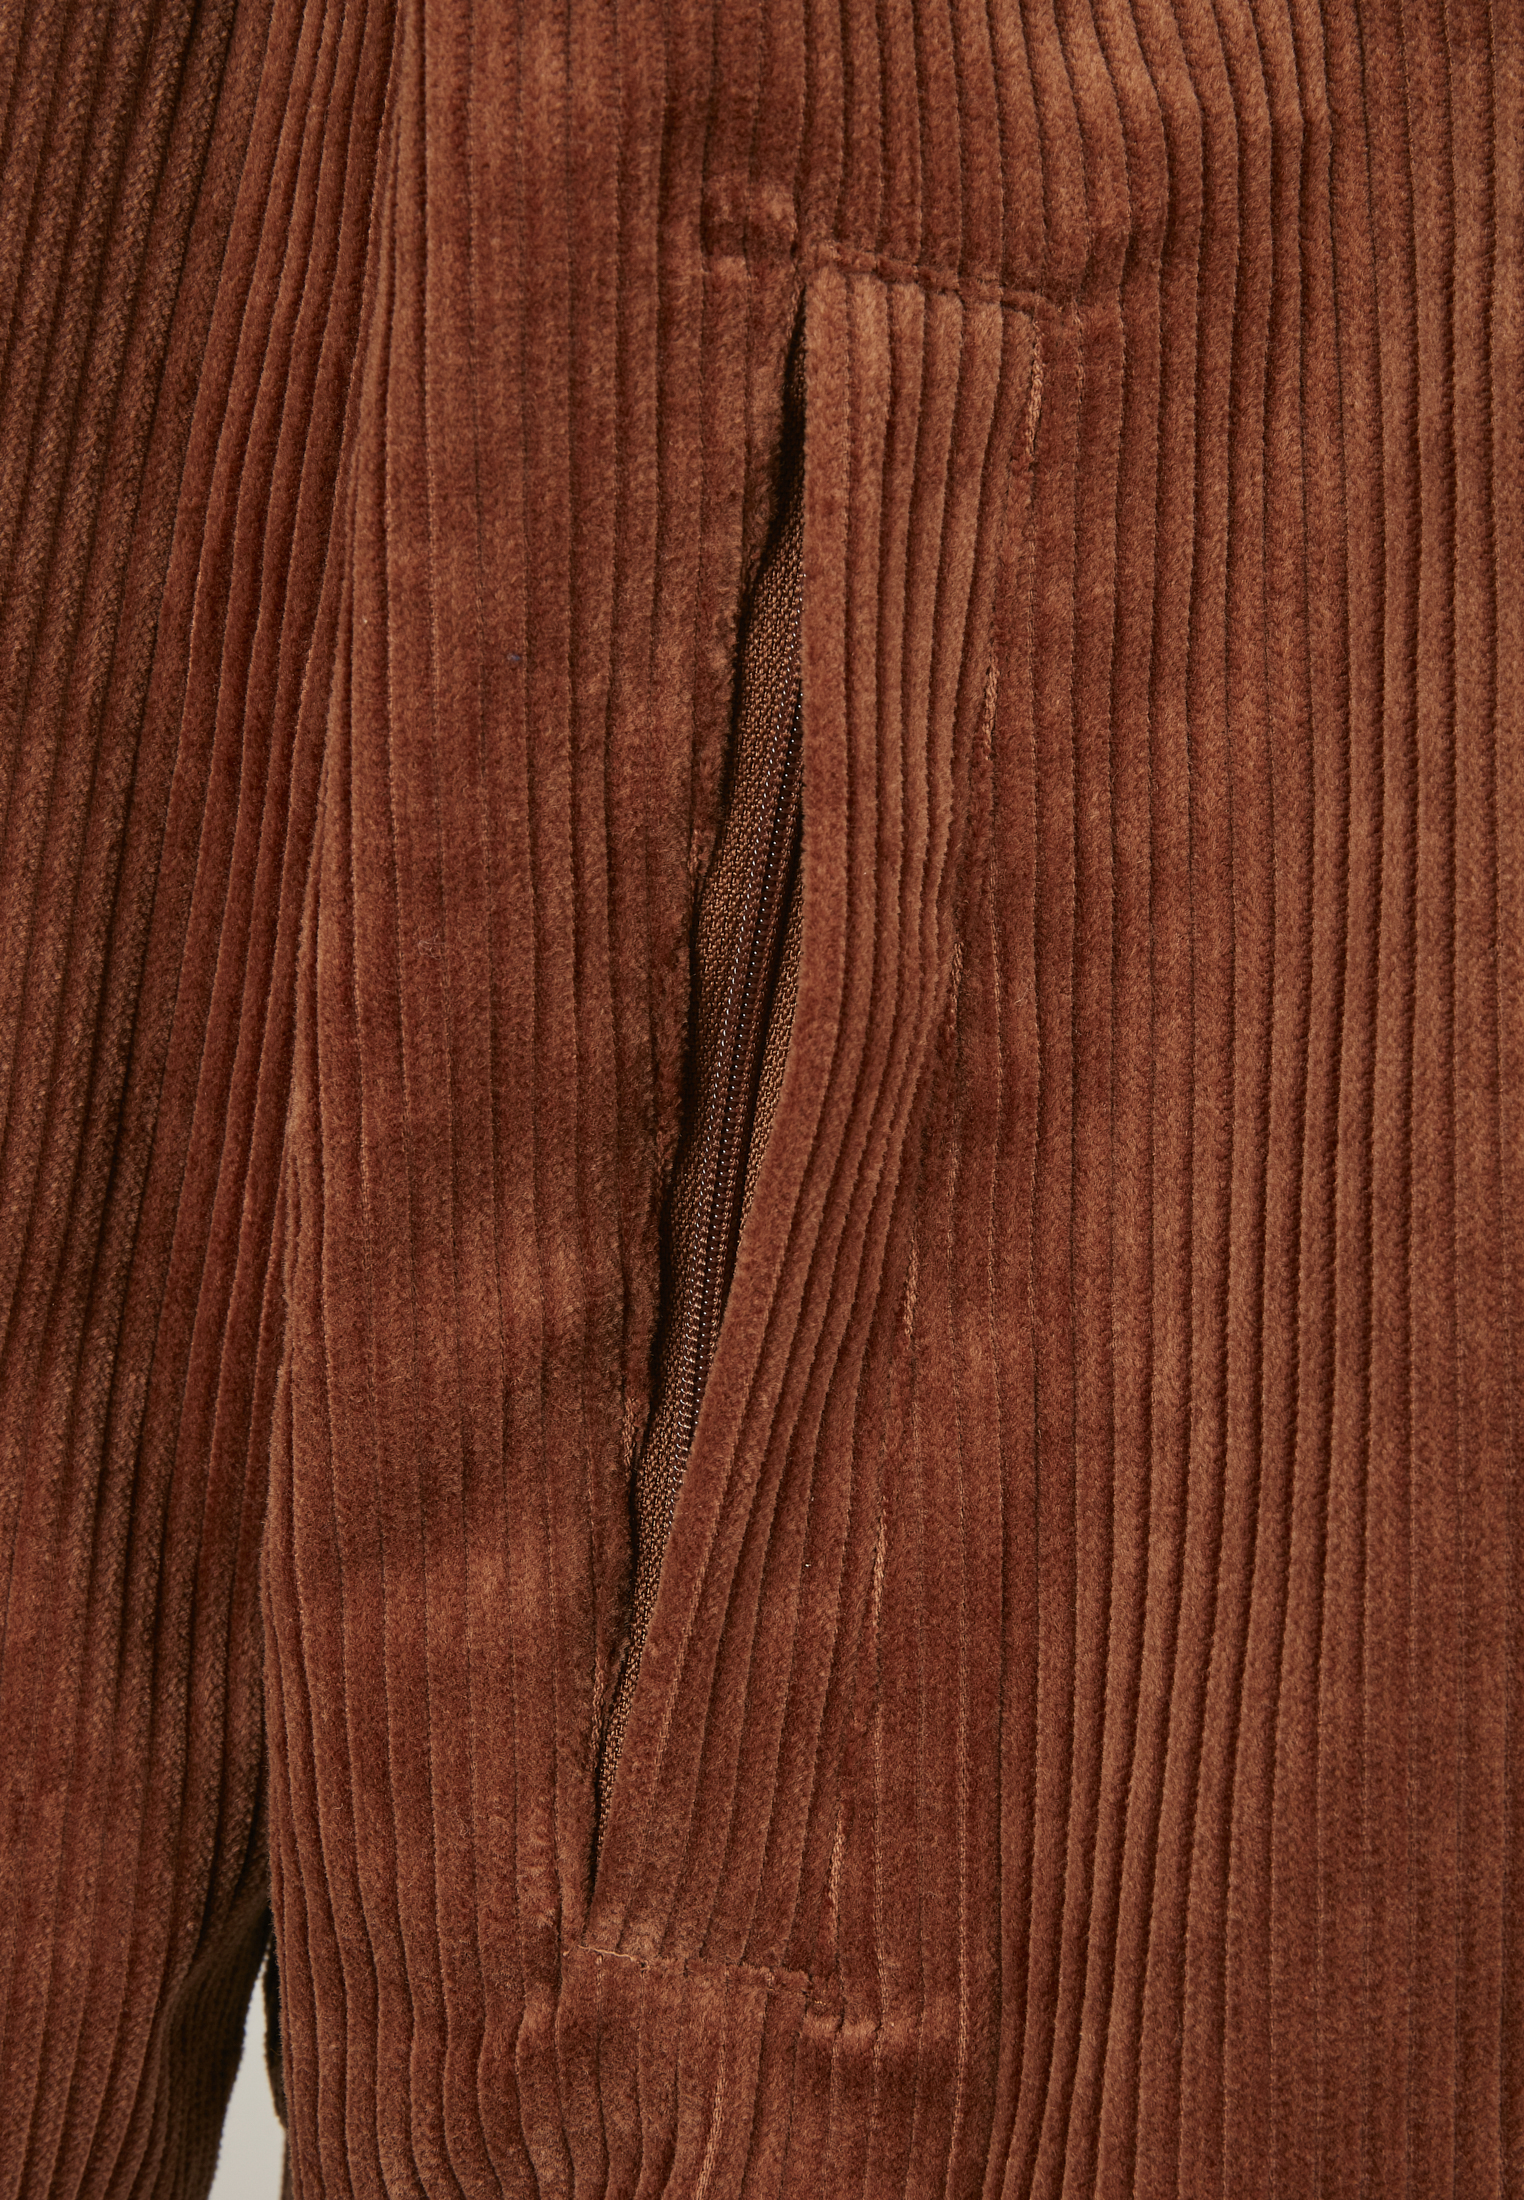 Light Jackets Boxy Corduroy Jacket in Farbe toffee